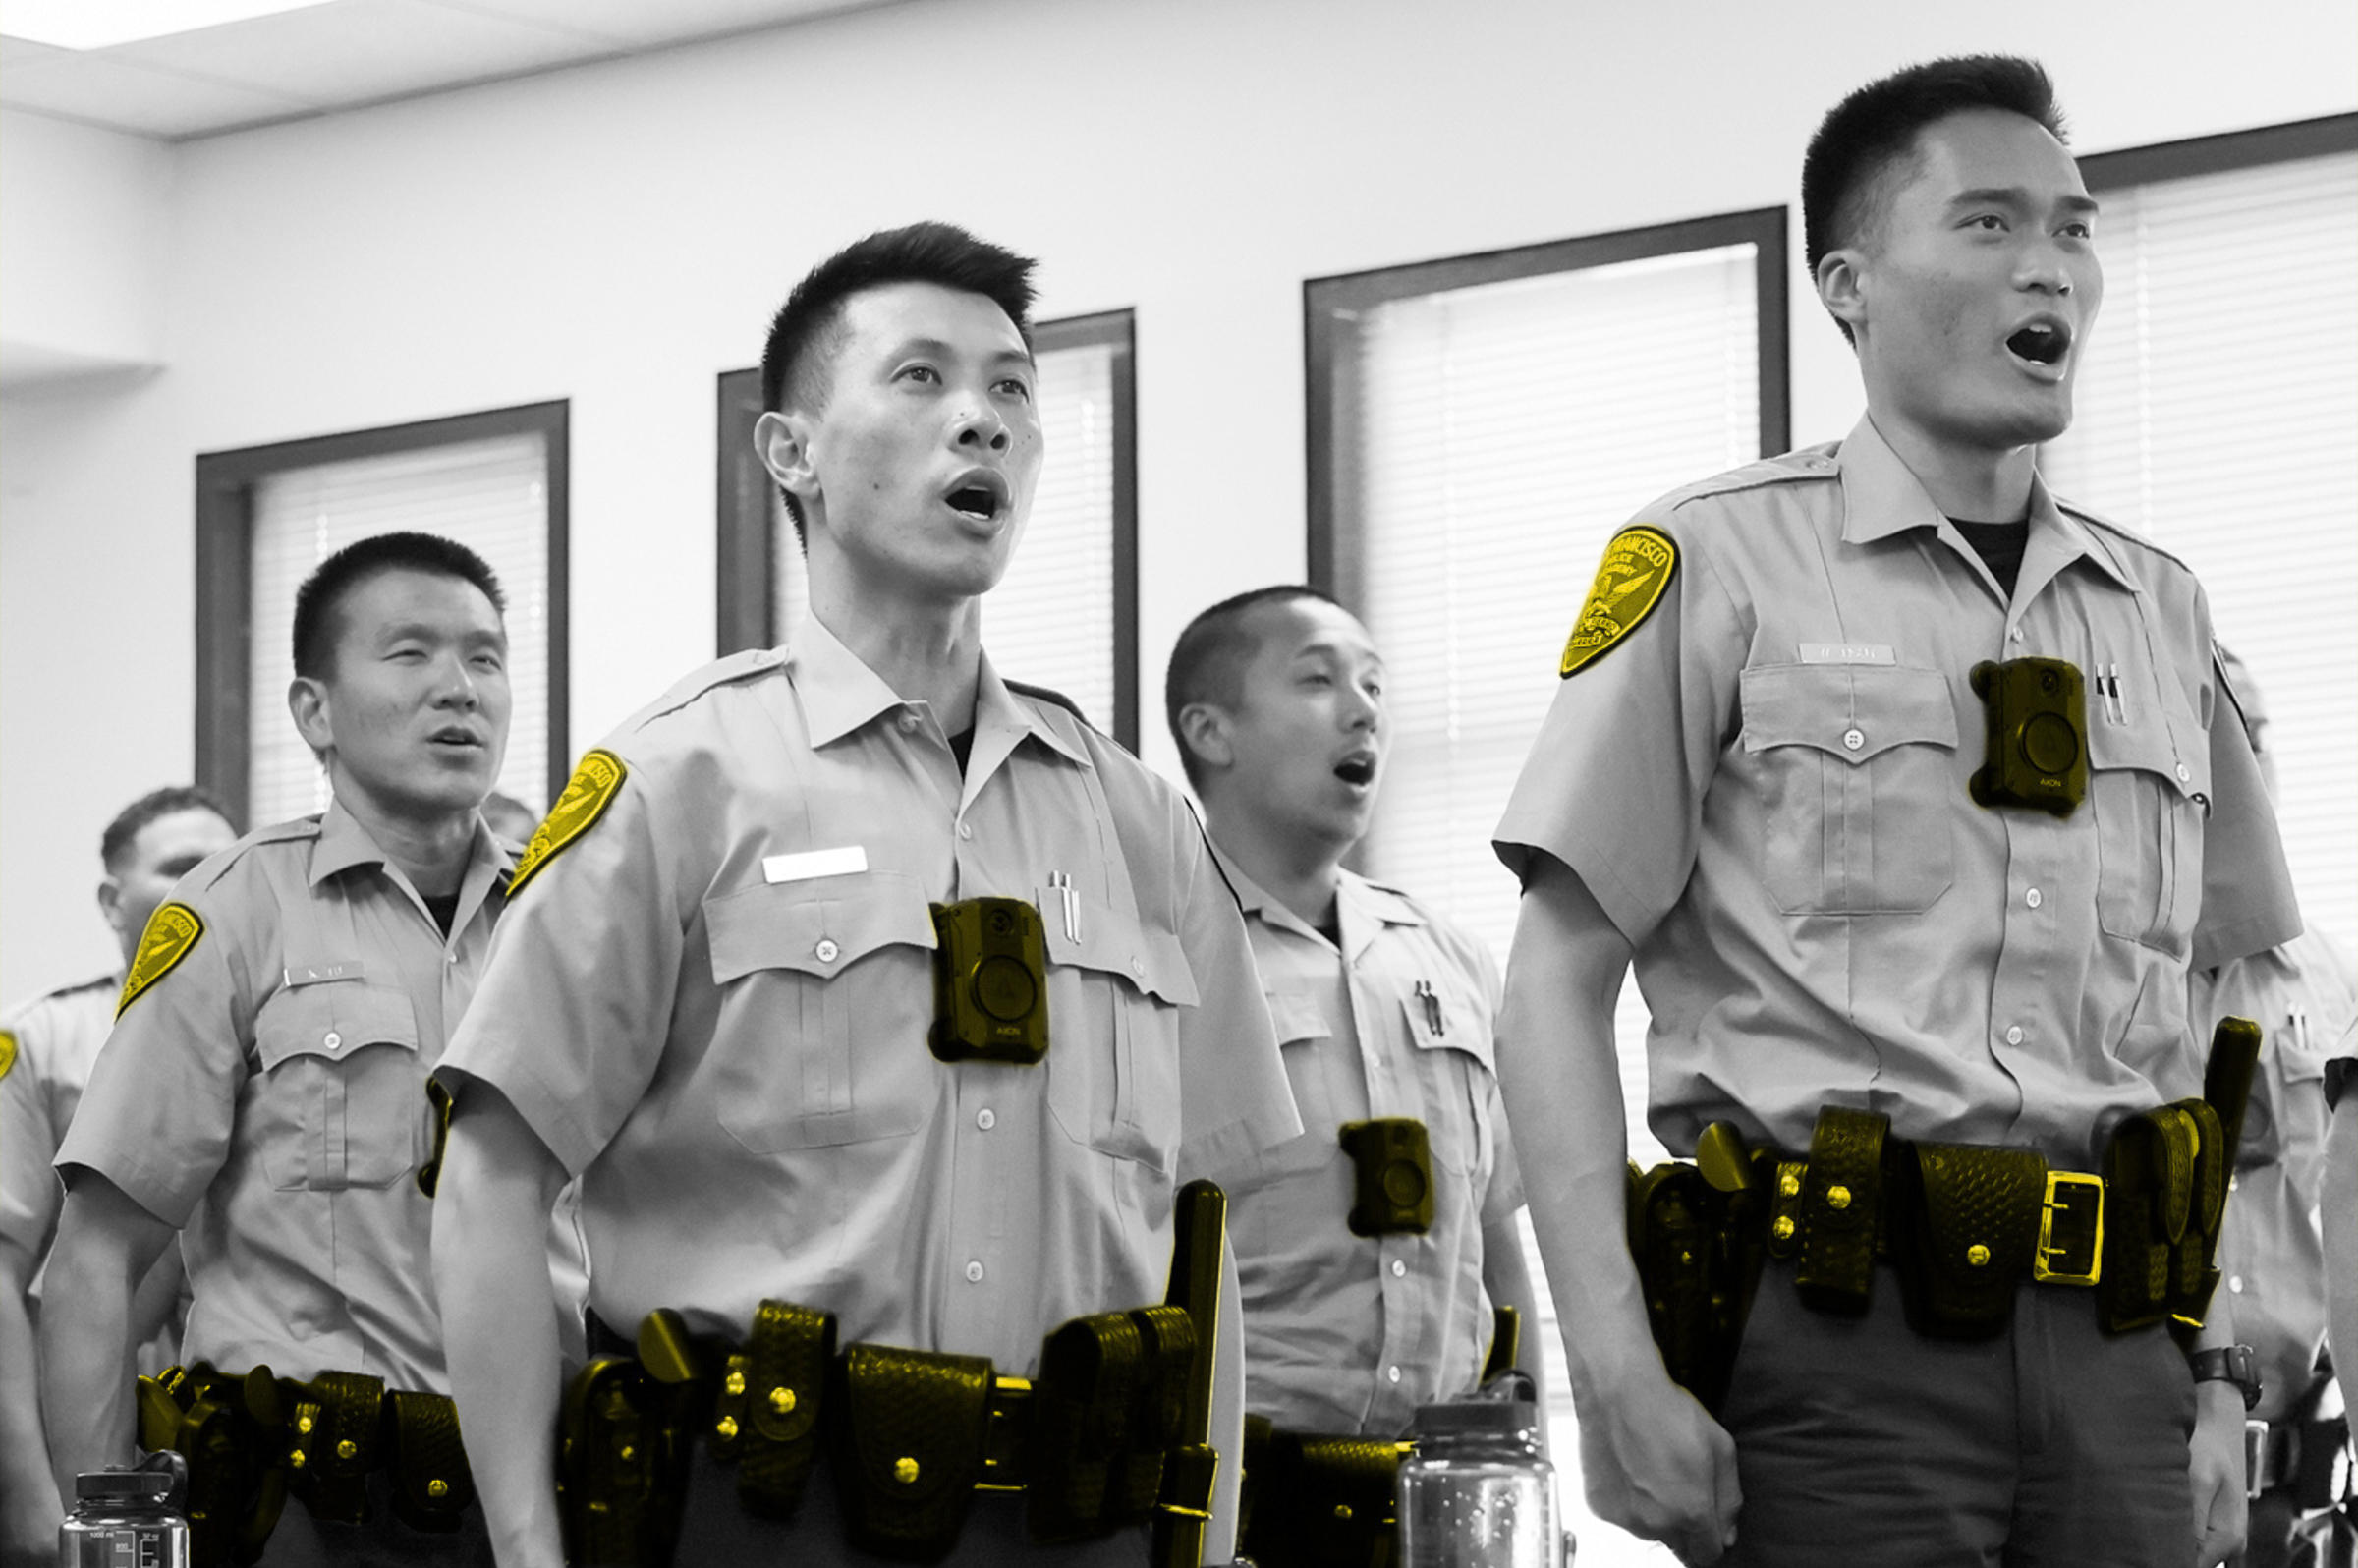 Uniformed officers stand in formation, reciting an oath with focused expressions.